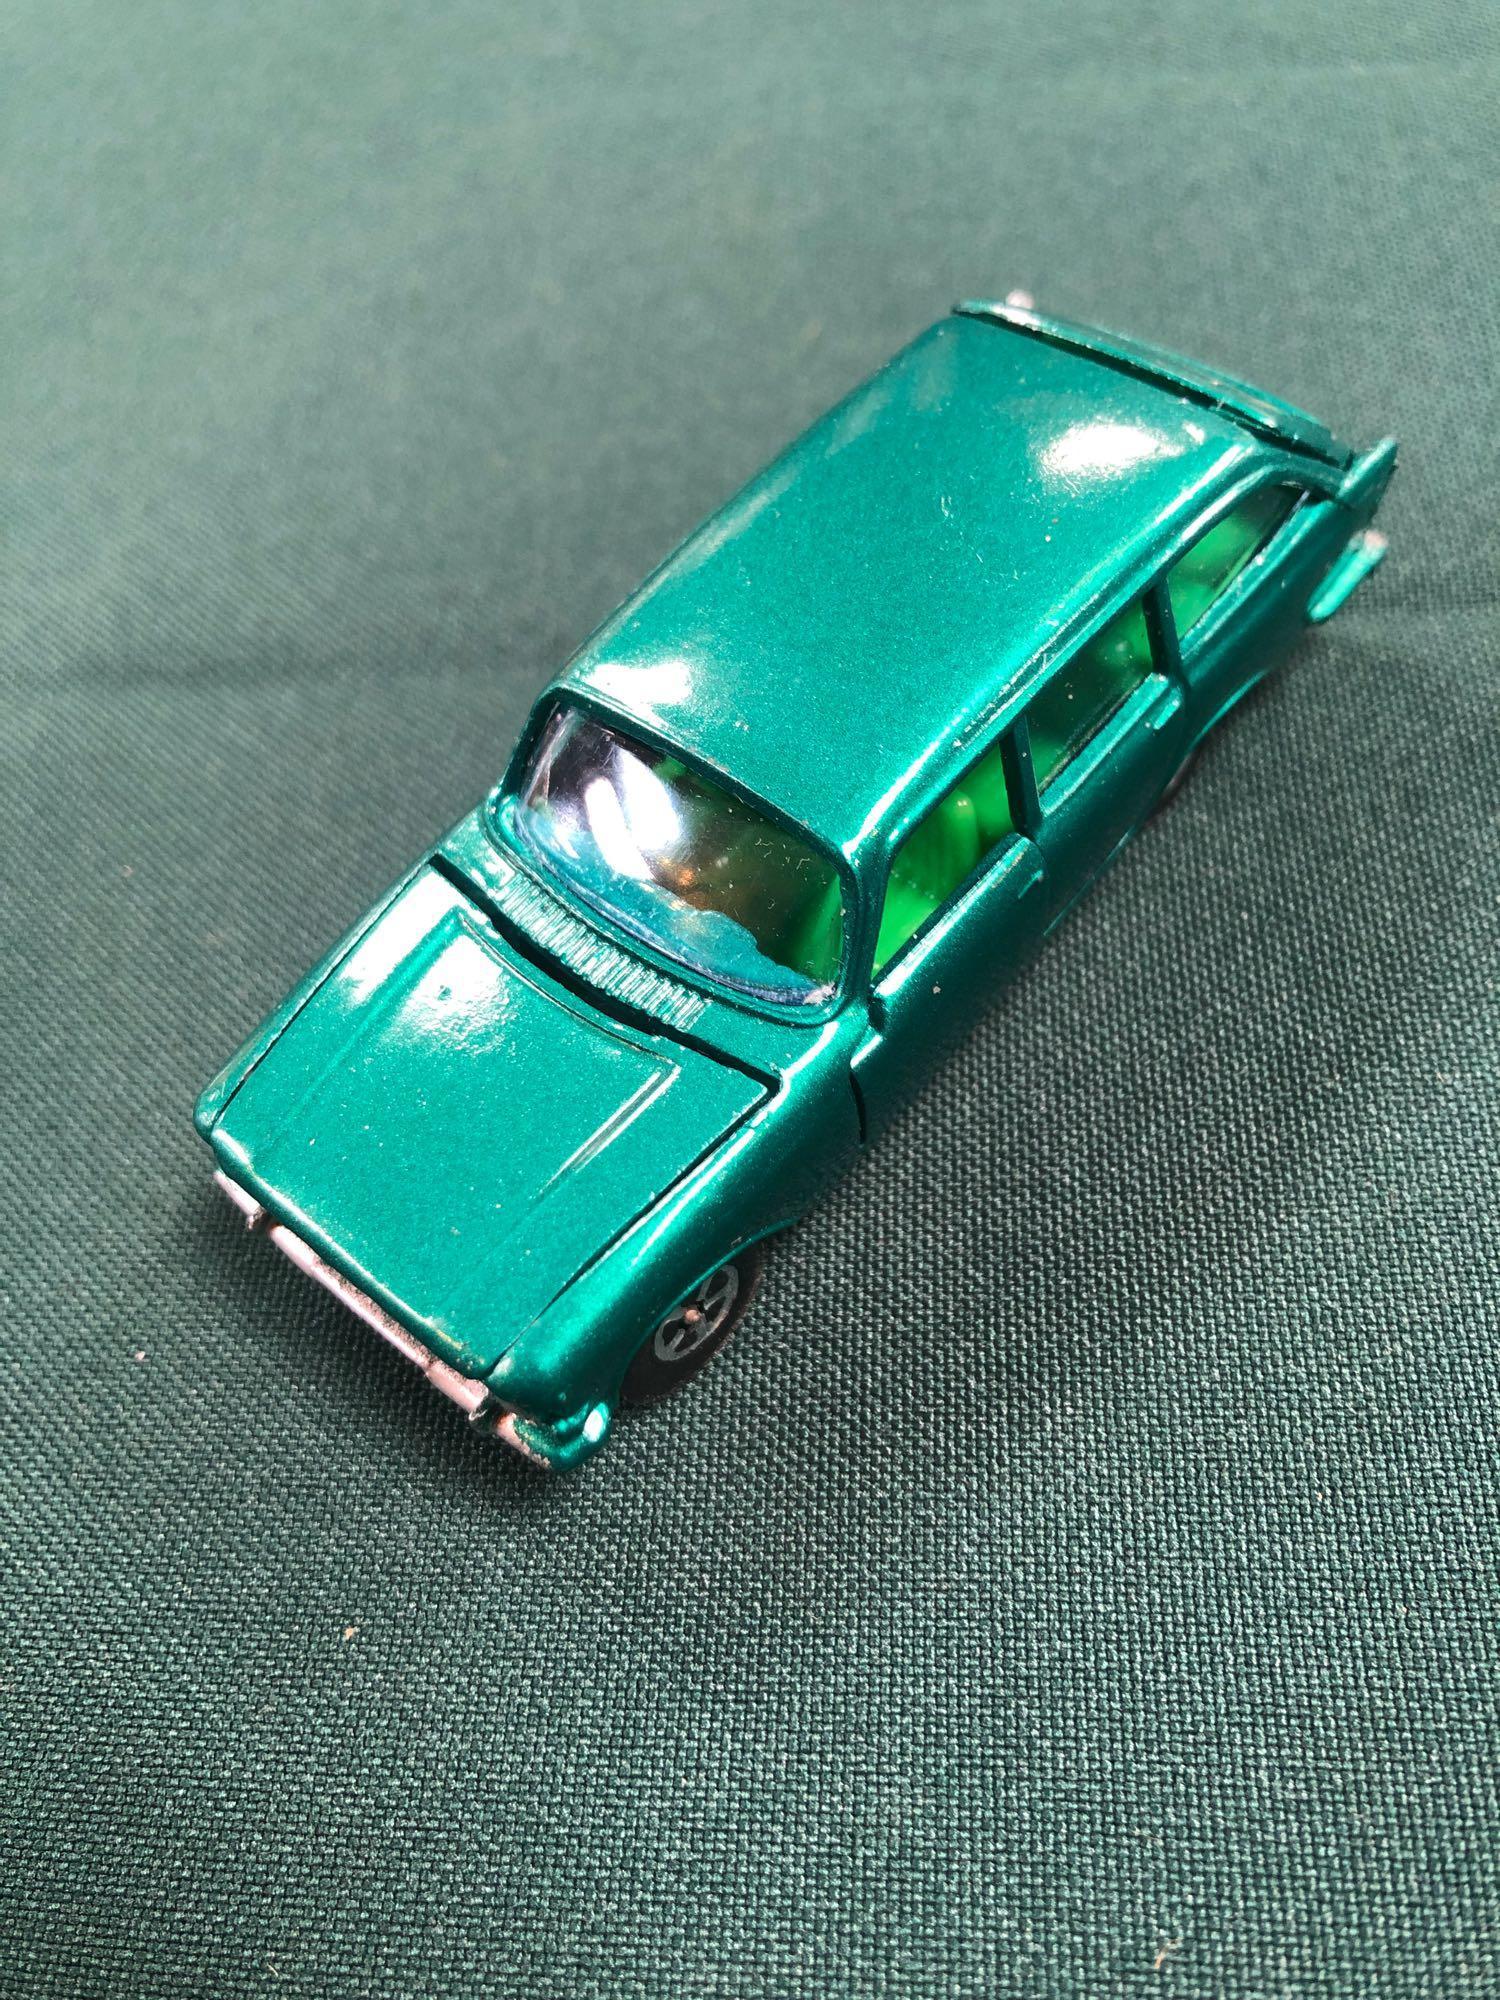 Lone Star Flyers Diecast Model #14 Ford (GB) Zodiac Mark III Estate In Green With Green Interior - Image 2 of 3